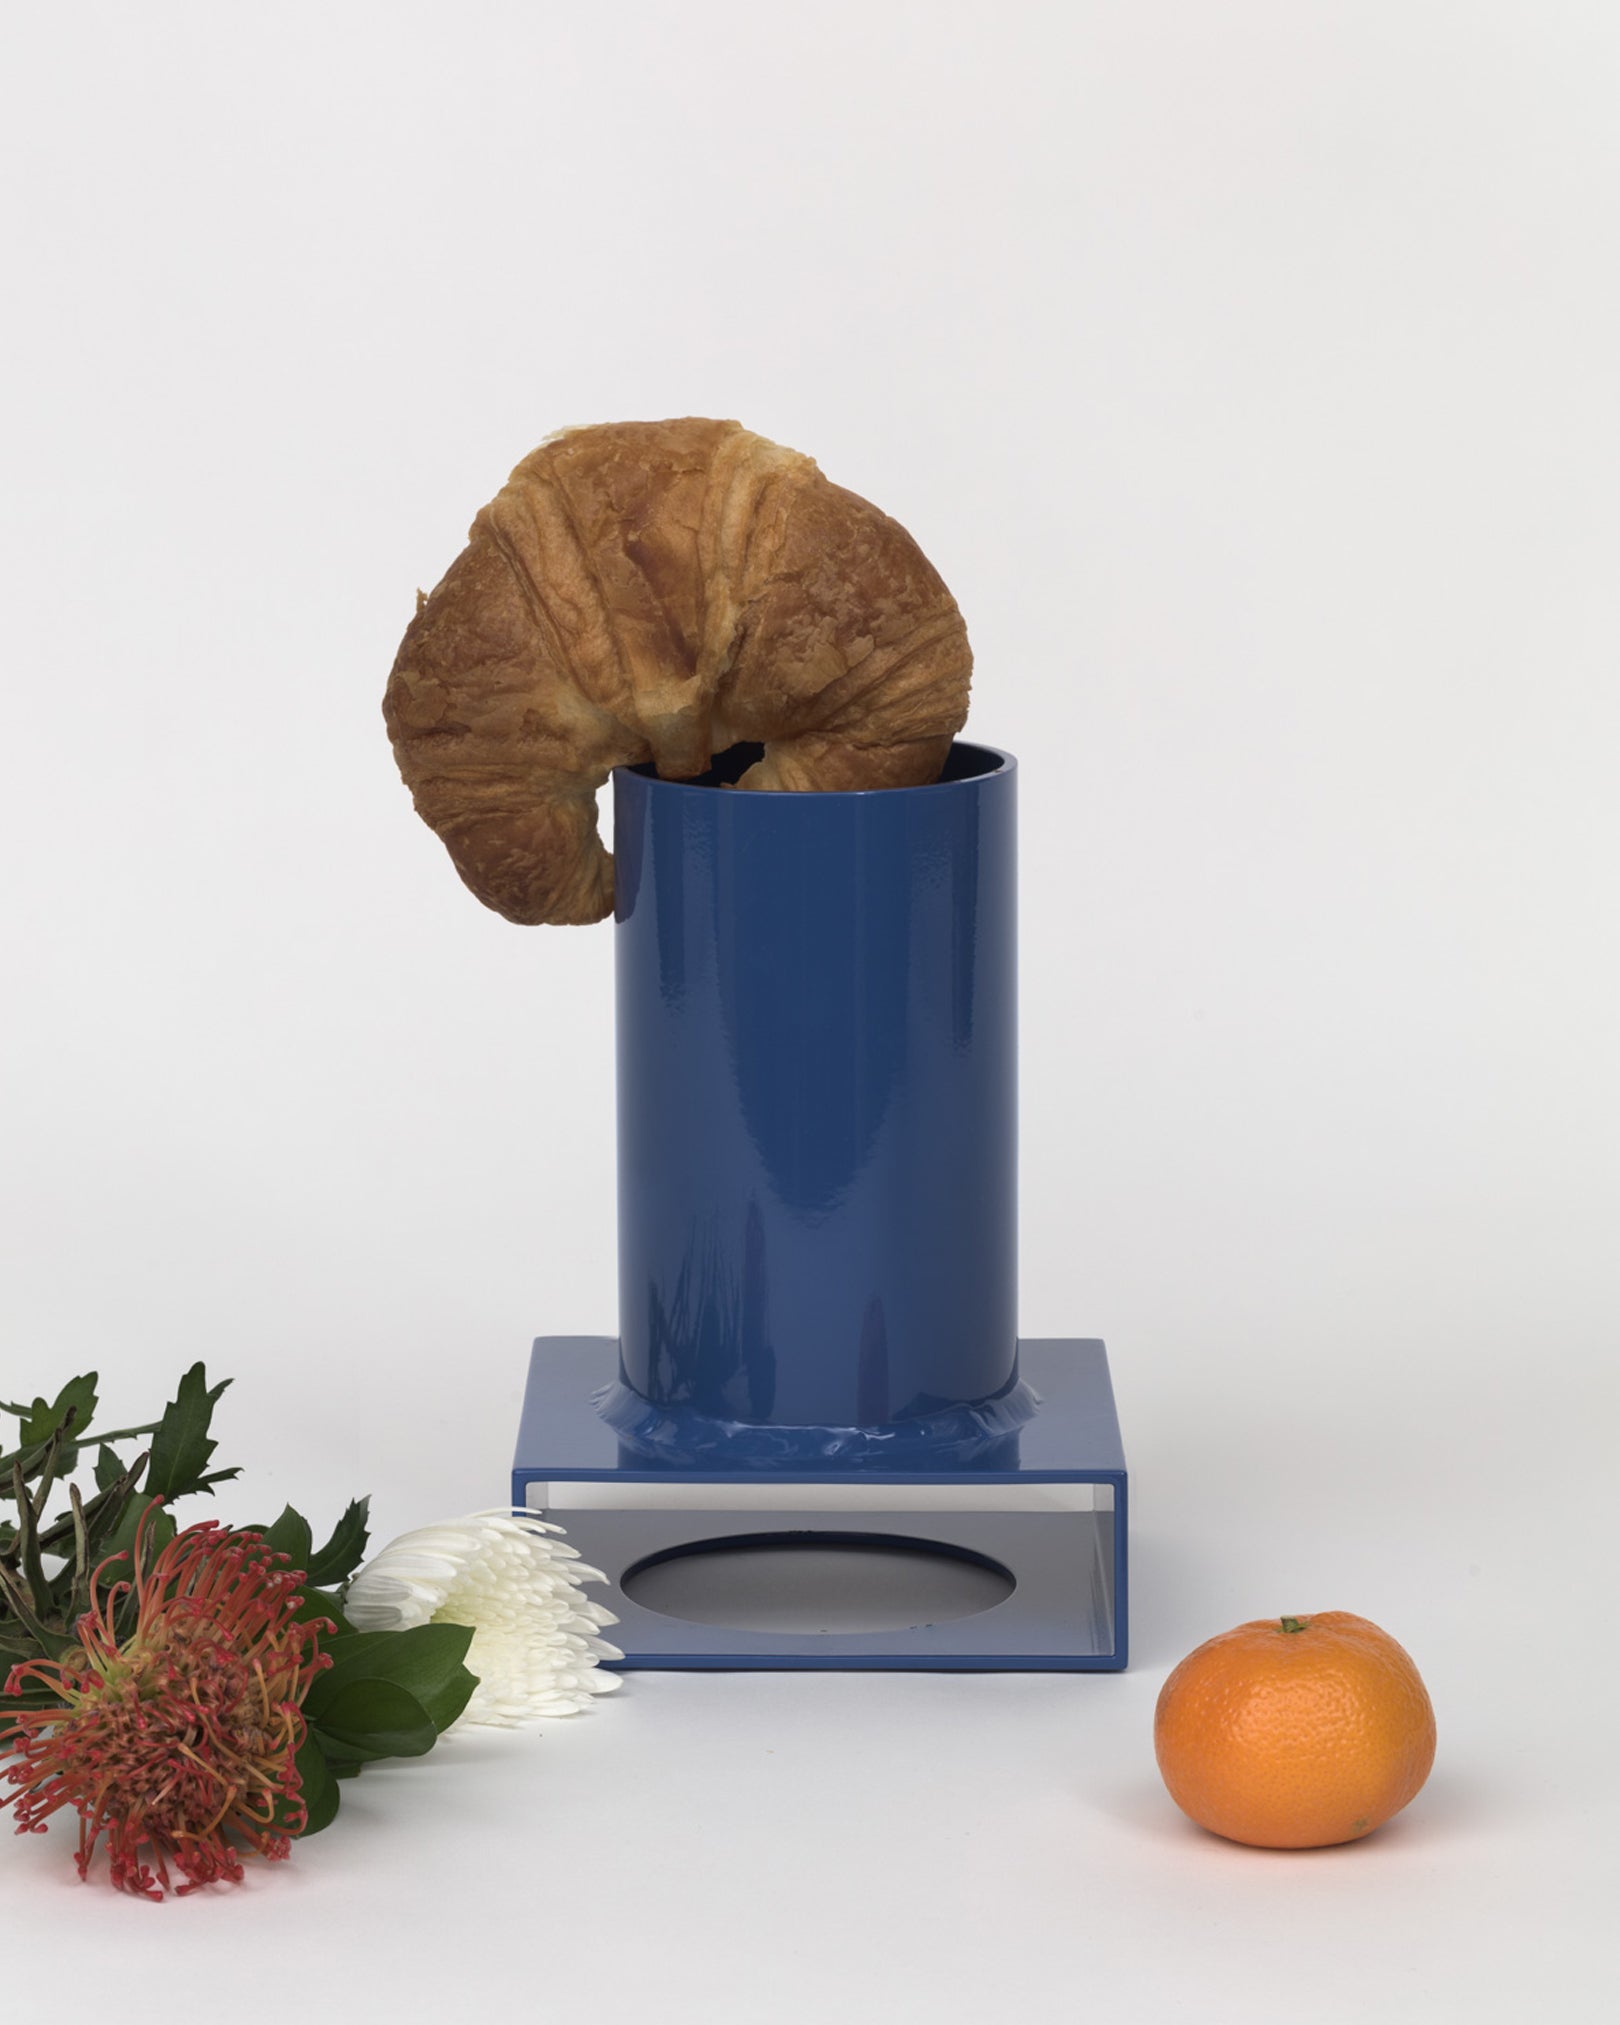 NICE CONDO Brute Tube Vase 002 in Deep Adult Blue available at Lahn.shop